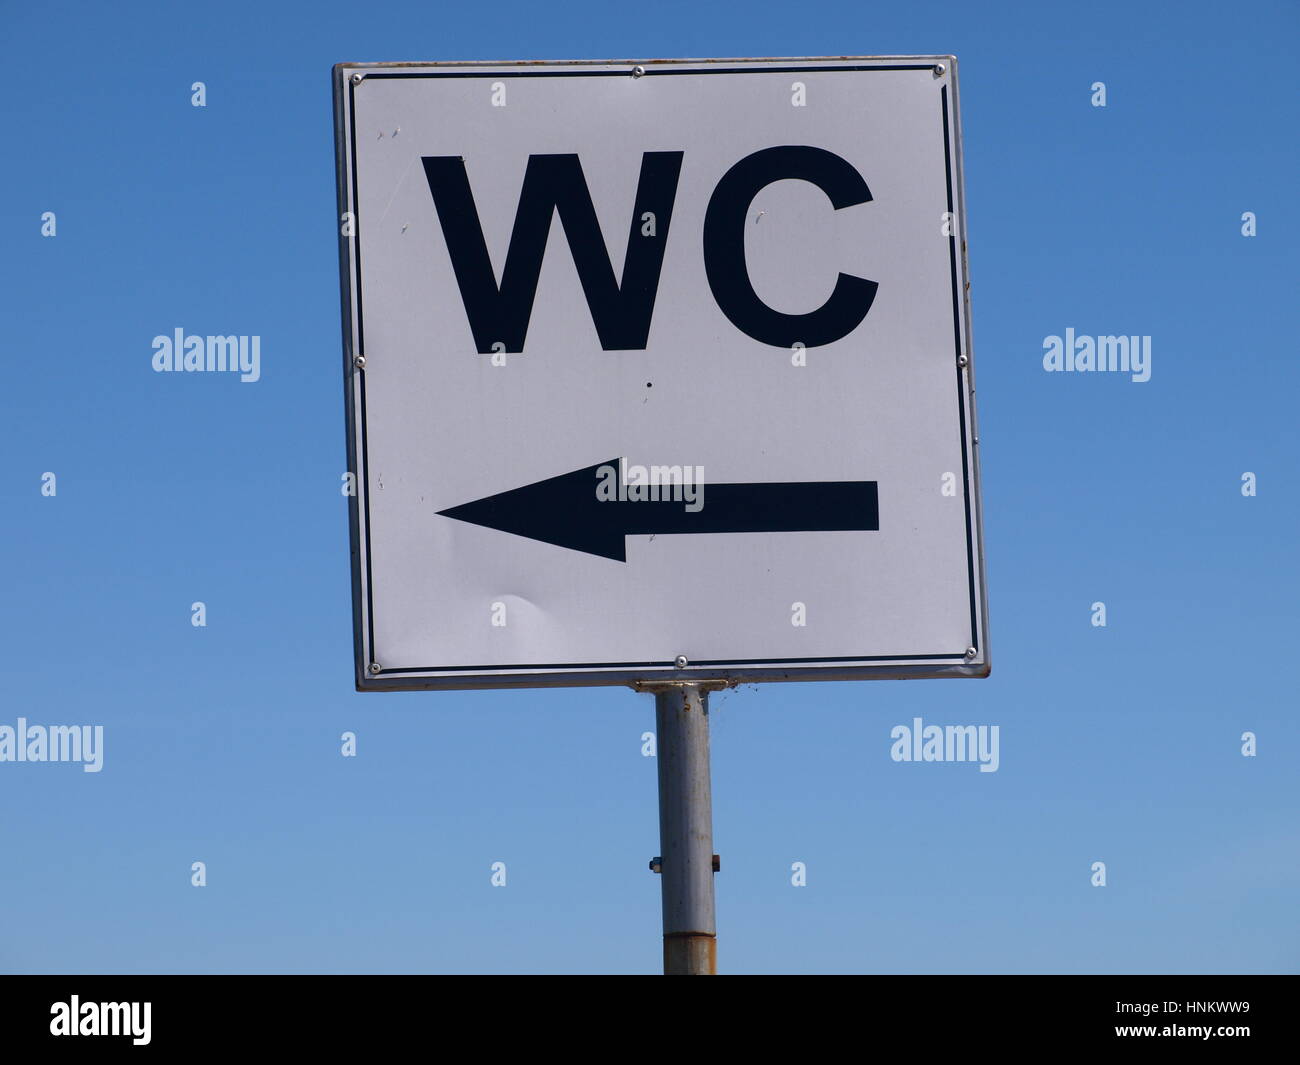 WC sign Stock Photo